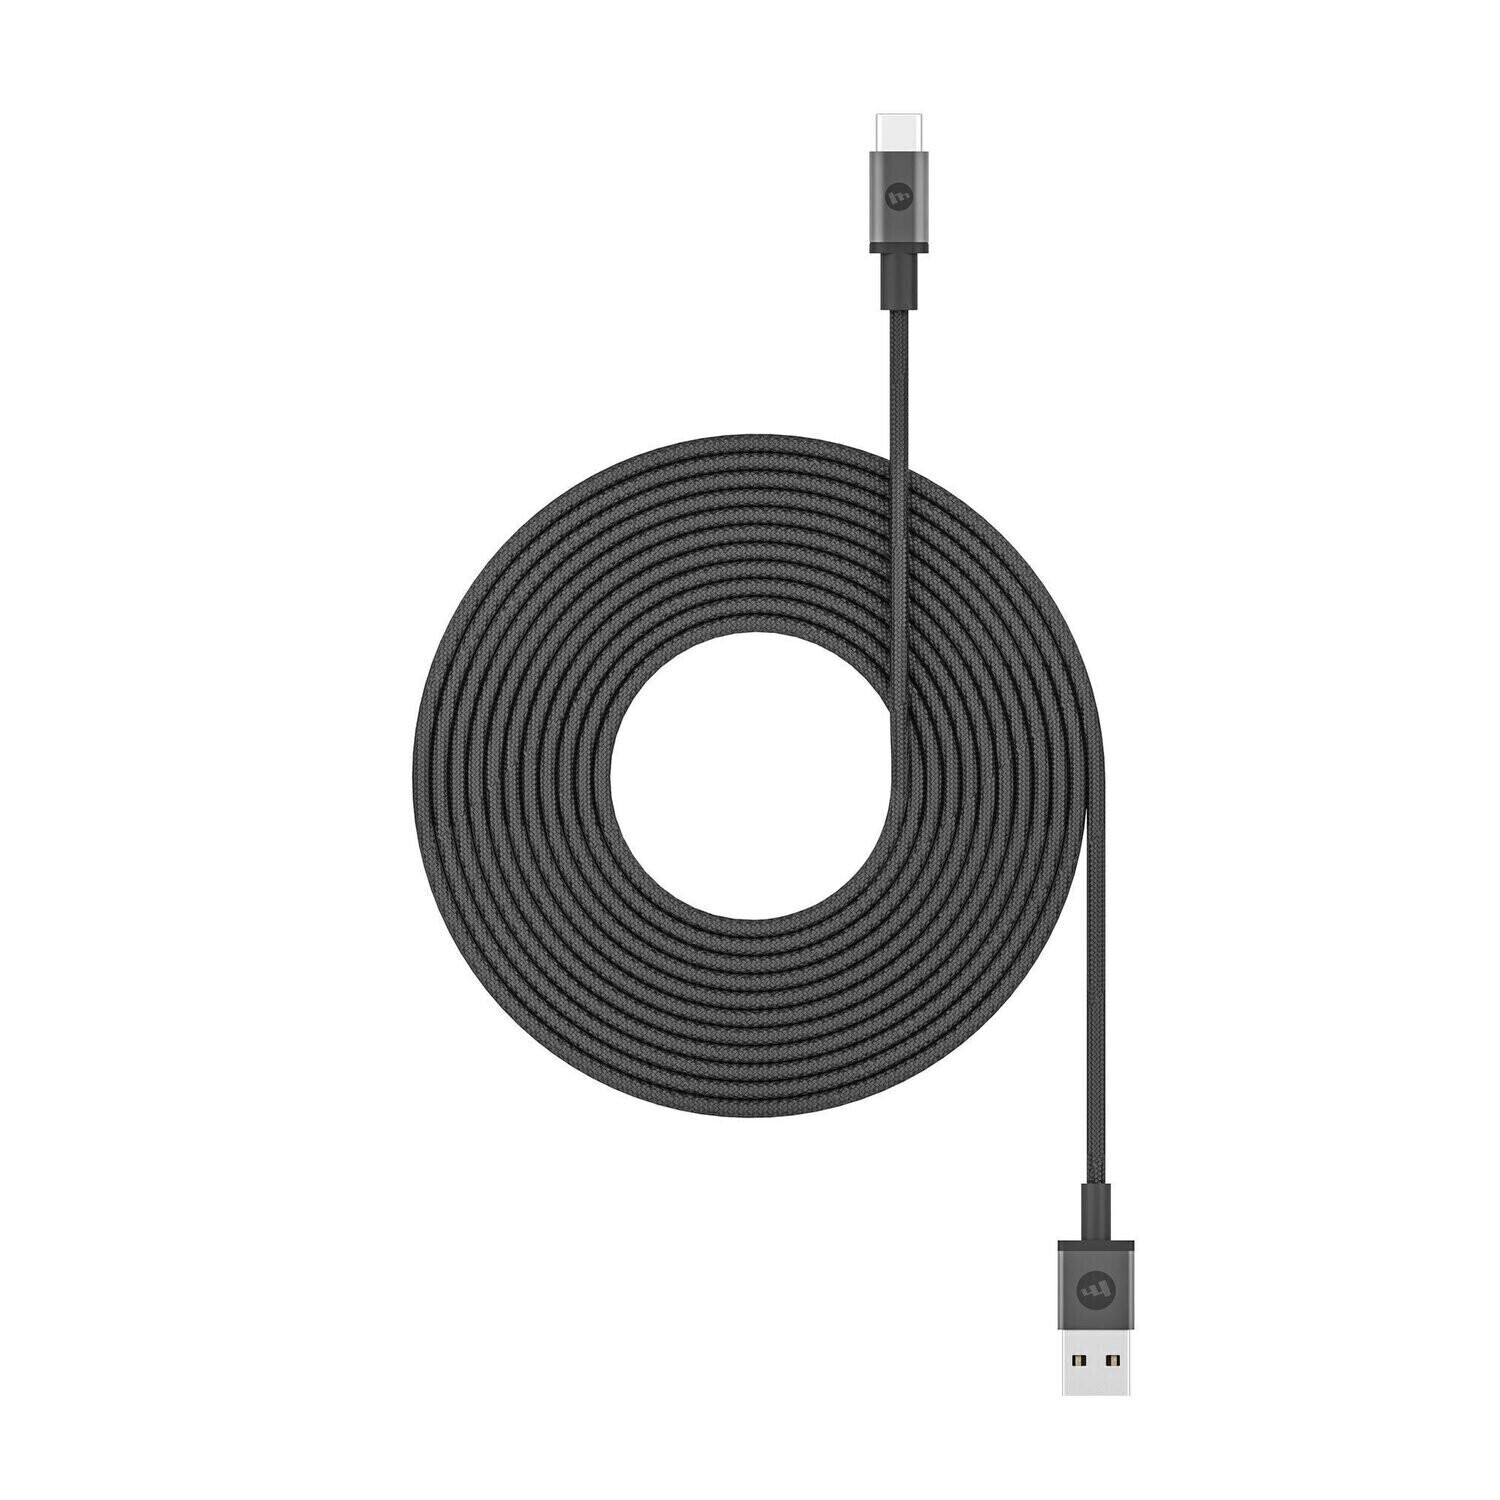 Mophie Cable USB-A to USB-C (3 Meter), Black